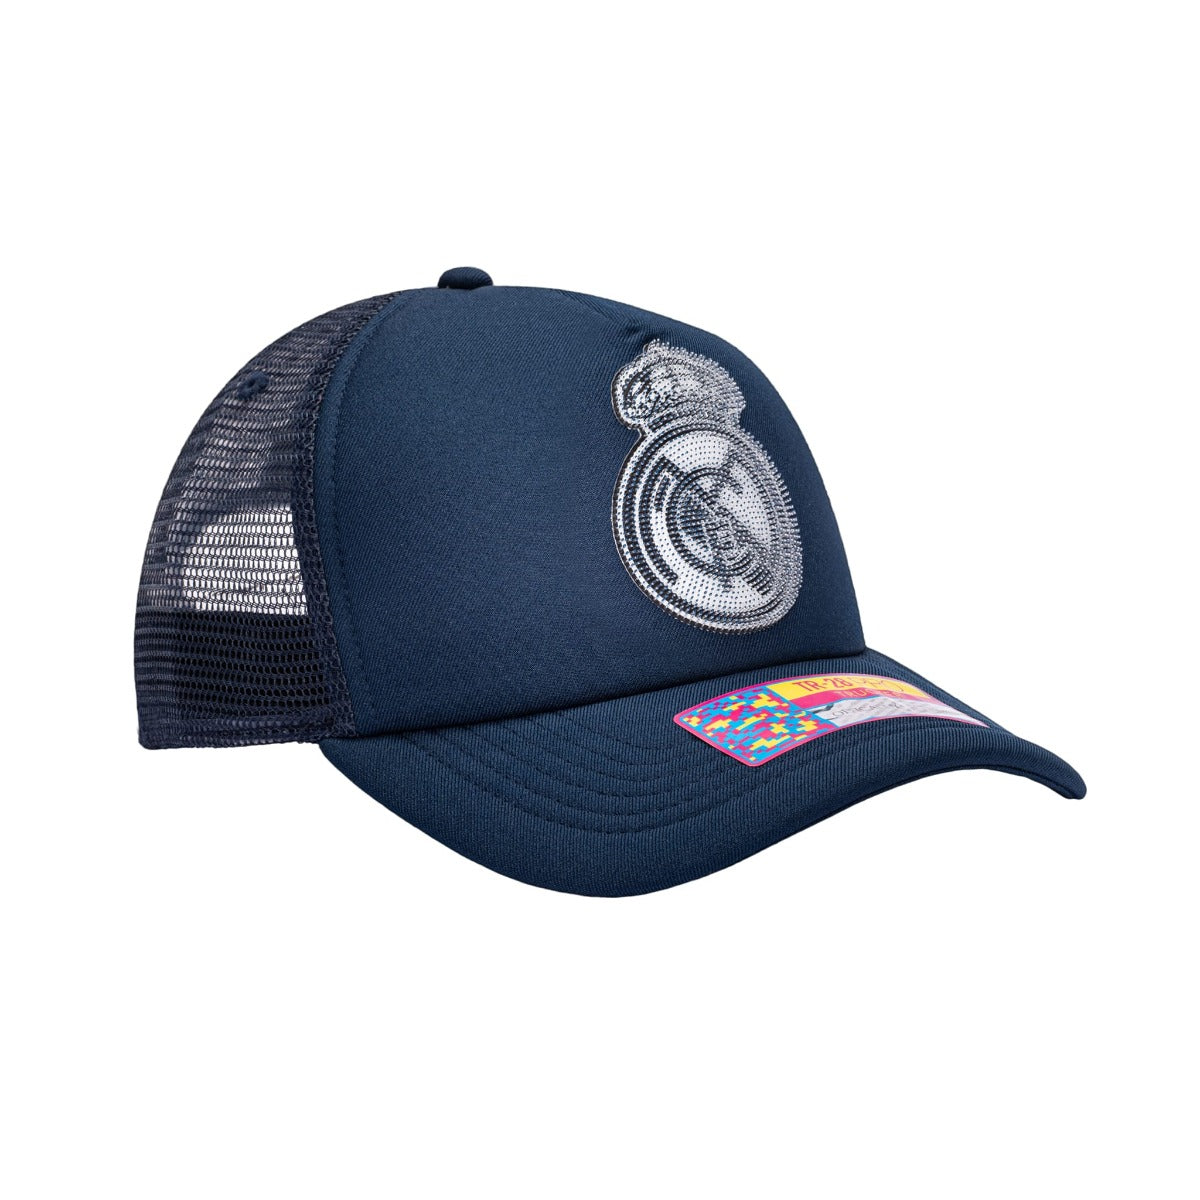 FI Collection Real Madrid Shield Trucker Hat - Navy (Diagonal 2)